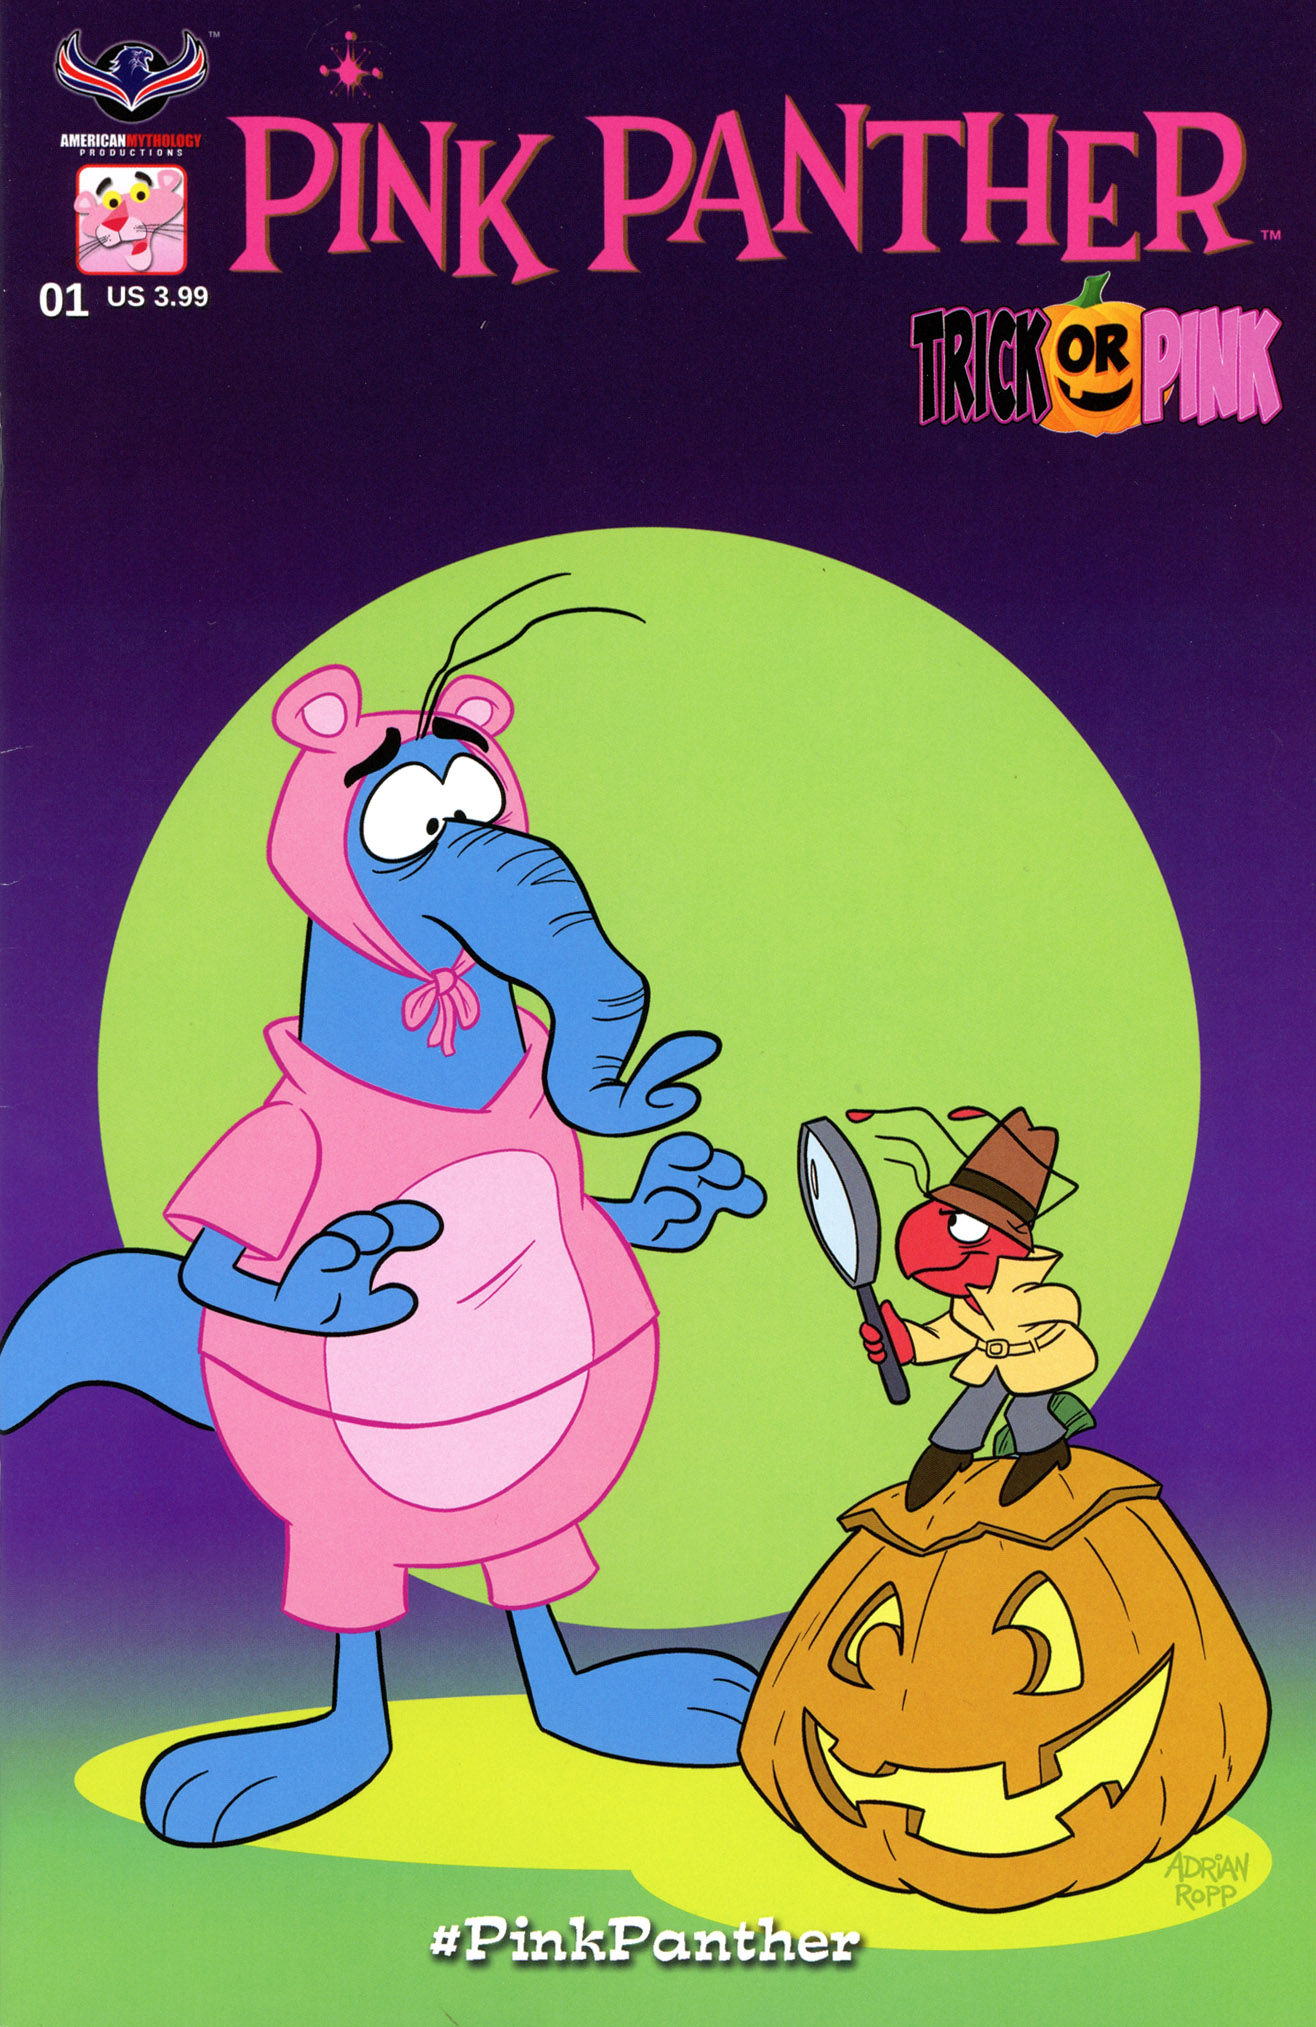 Read online Pink Panther: Trick or Pink comic -  Issue # Full - 1